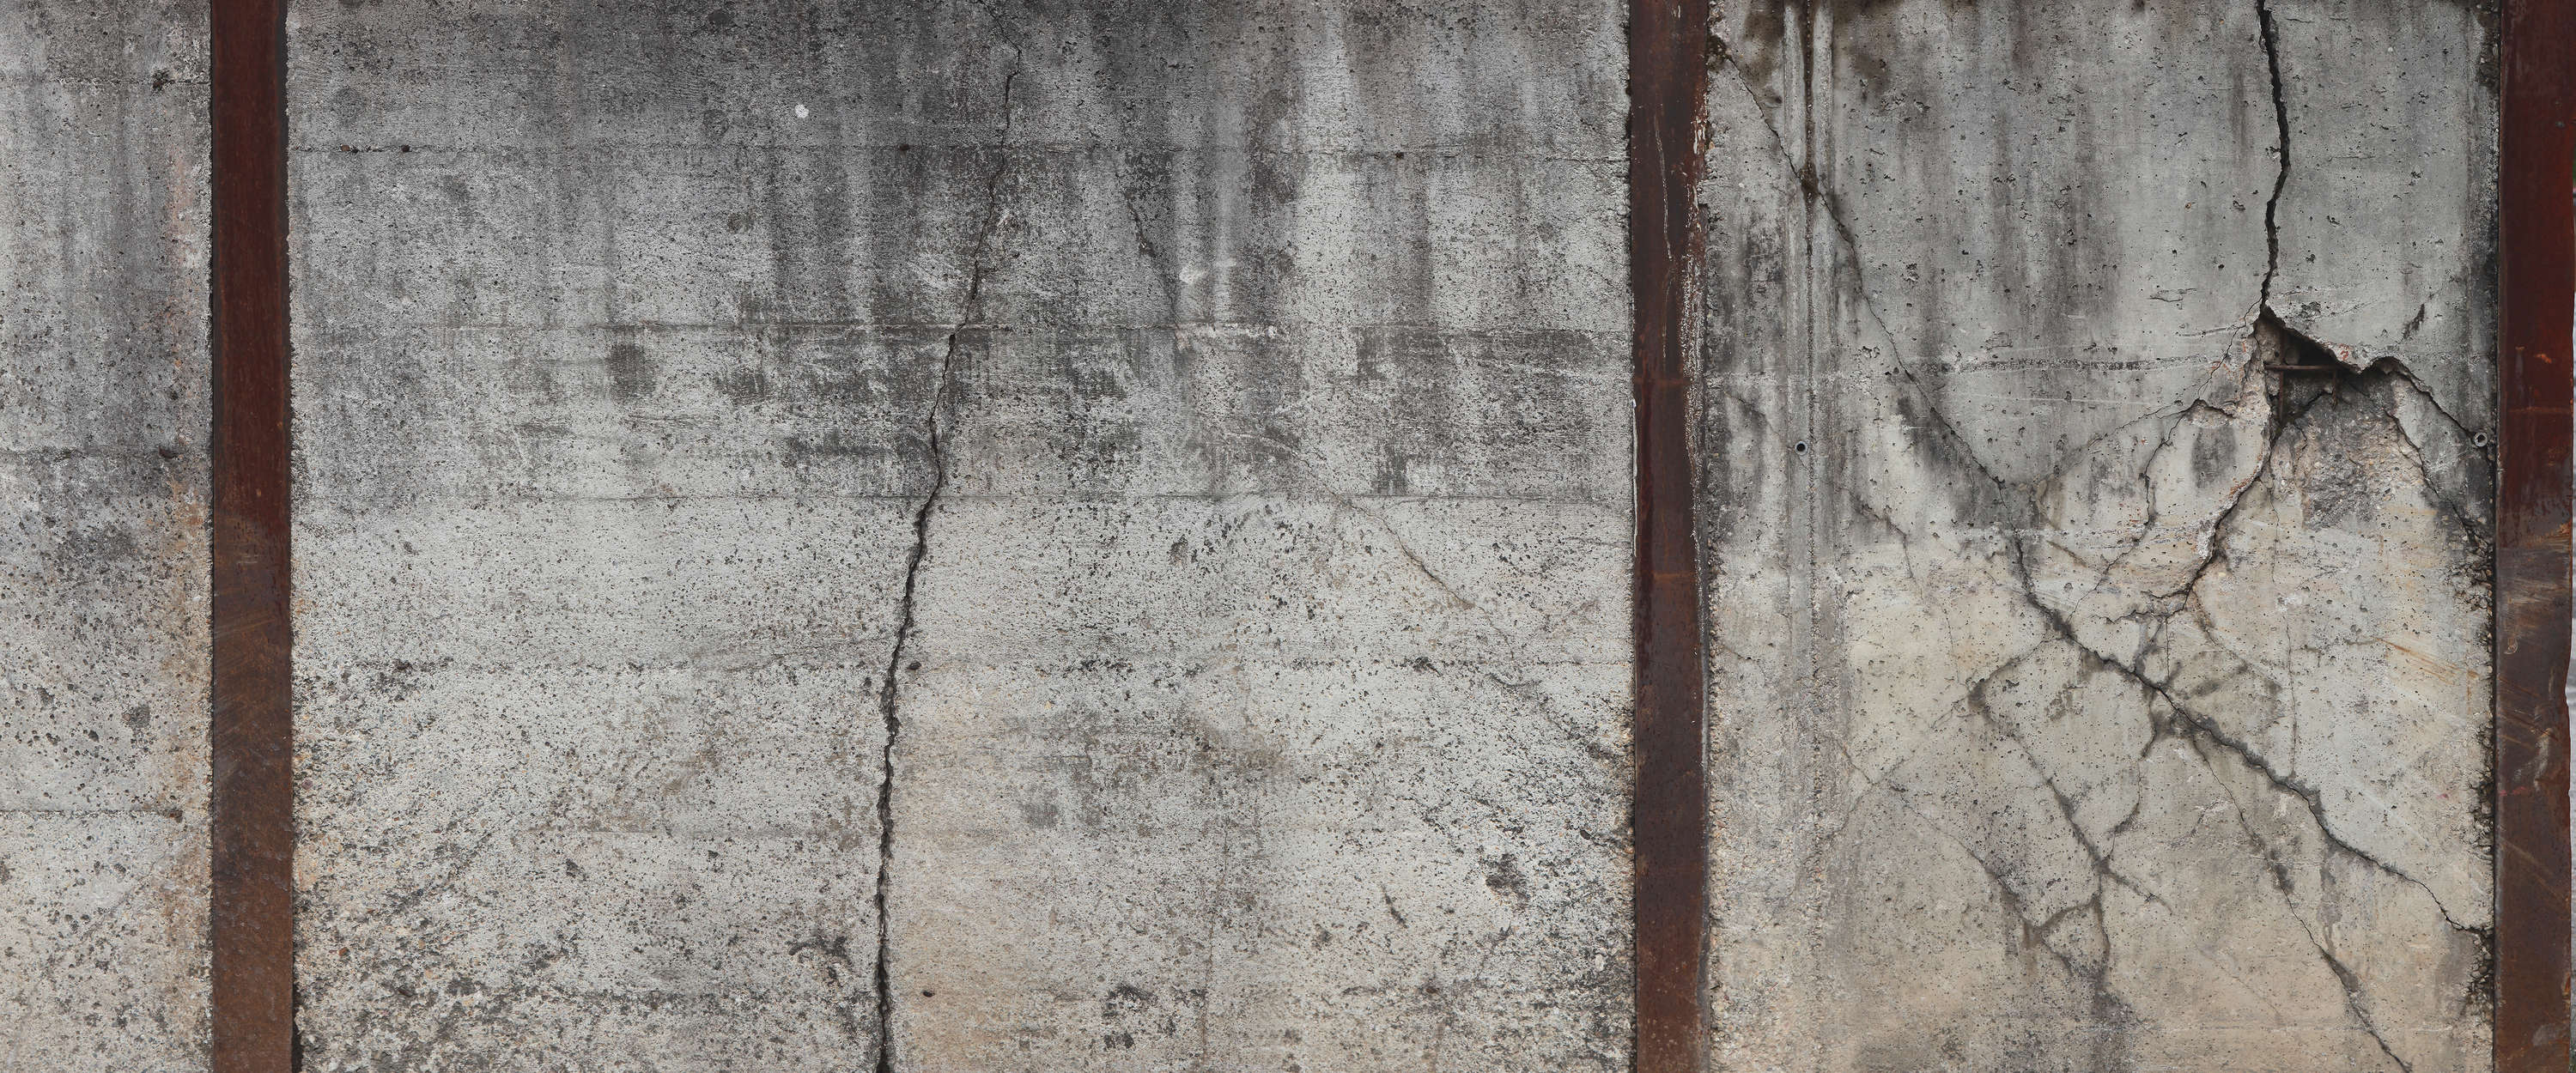             Photo wallpaper concrete wall in rustic style reinforced concrete
        